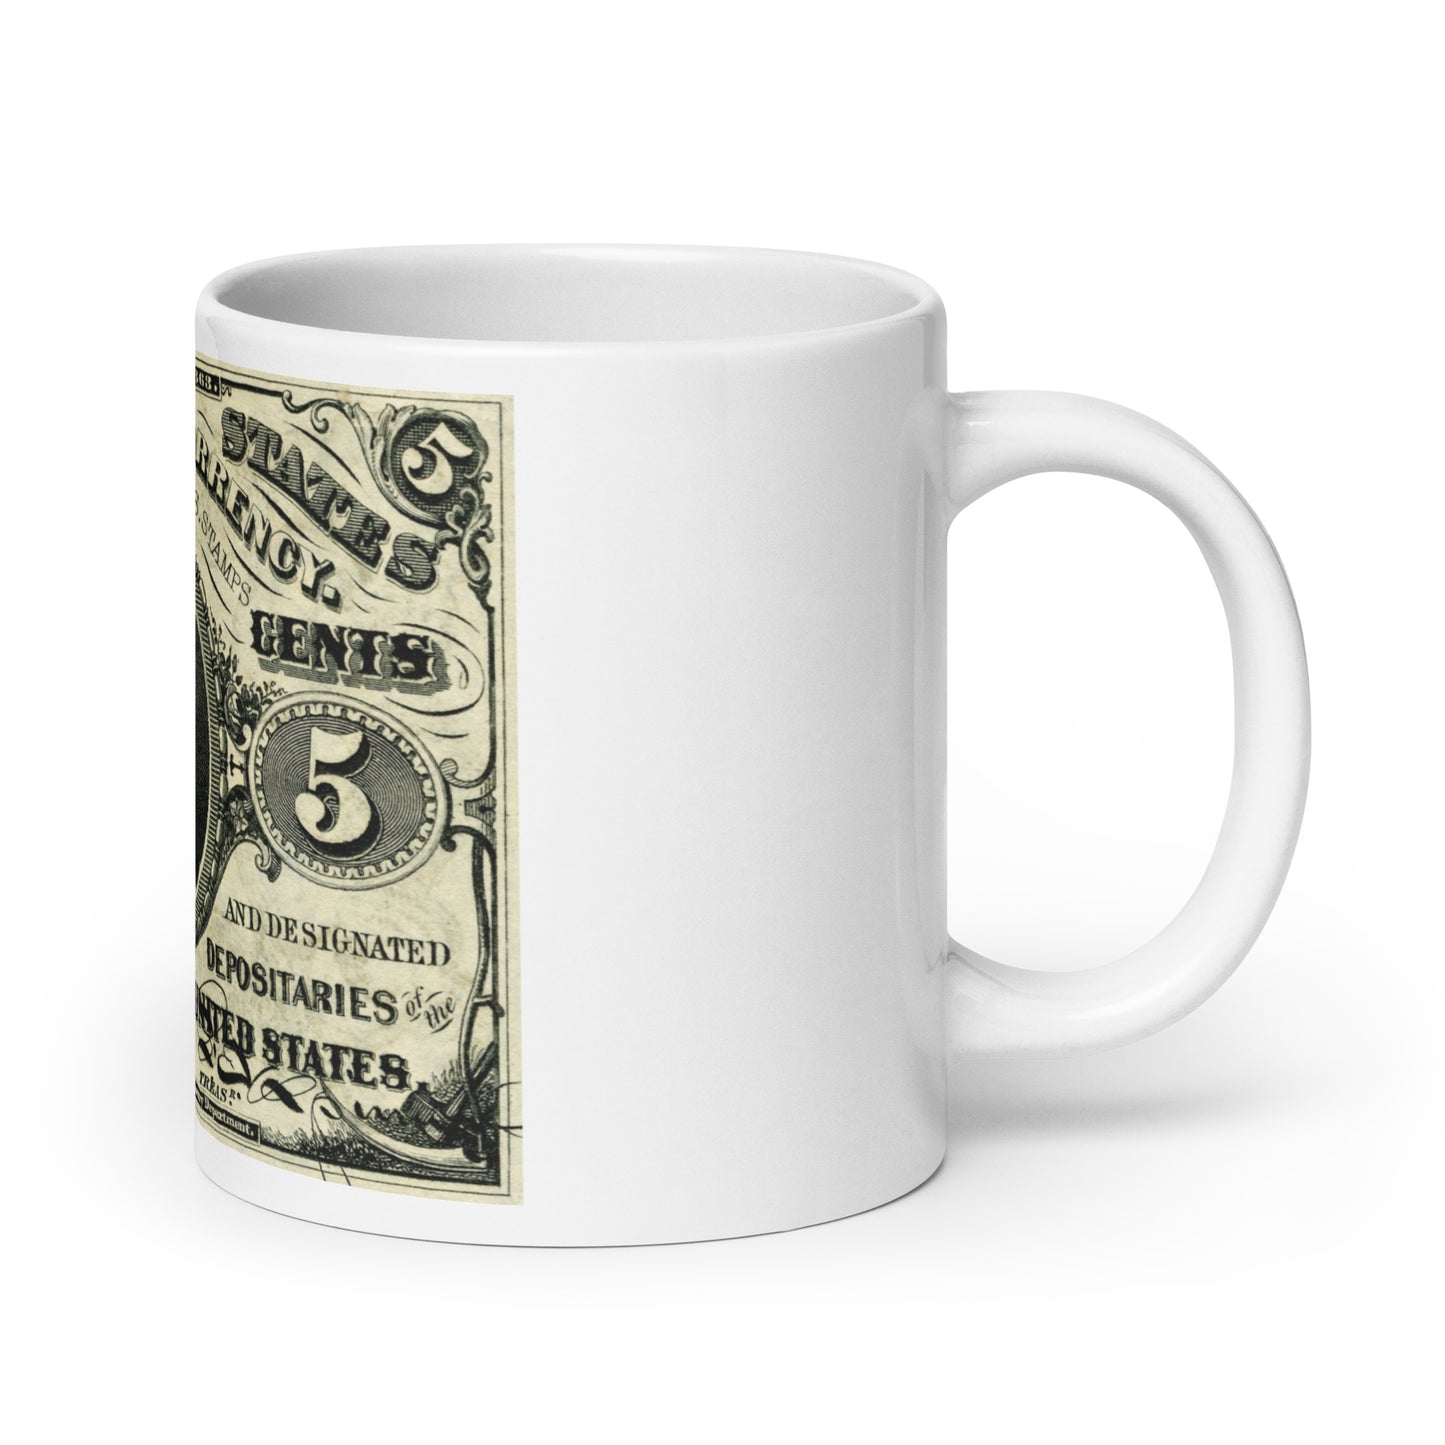 5 Cents 3RD Issue Fractional Currency Edition - Classic Currency Collector's Mug